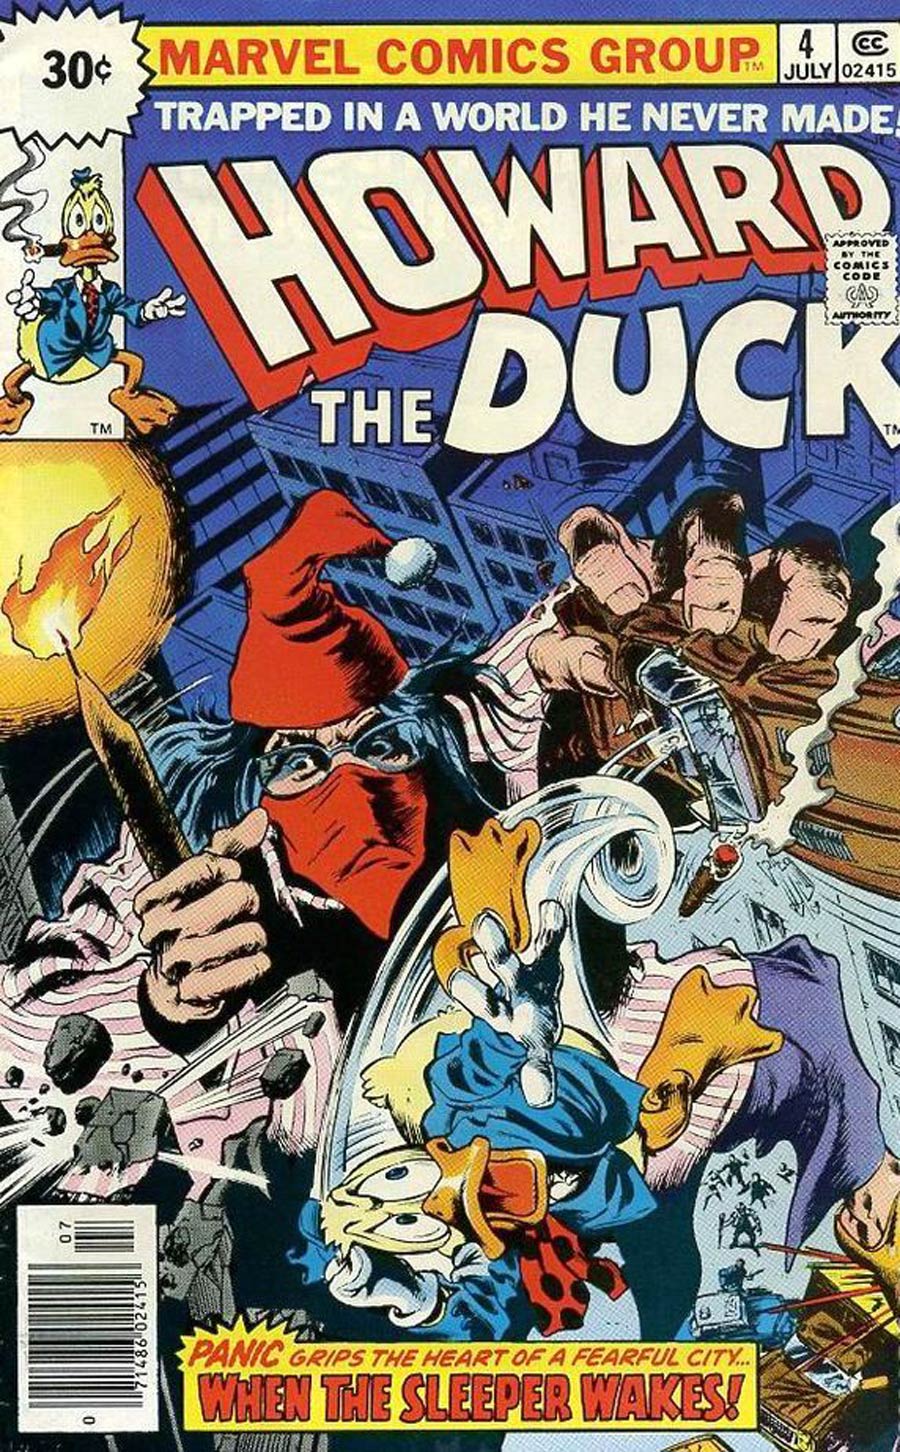 Howard The Duck Vol 1 #4 Cover B 30-Cent Variant 